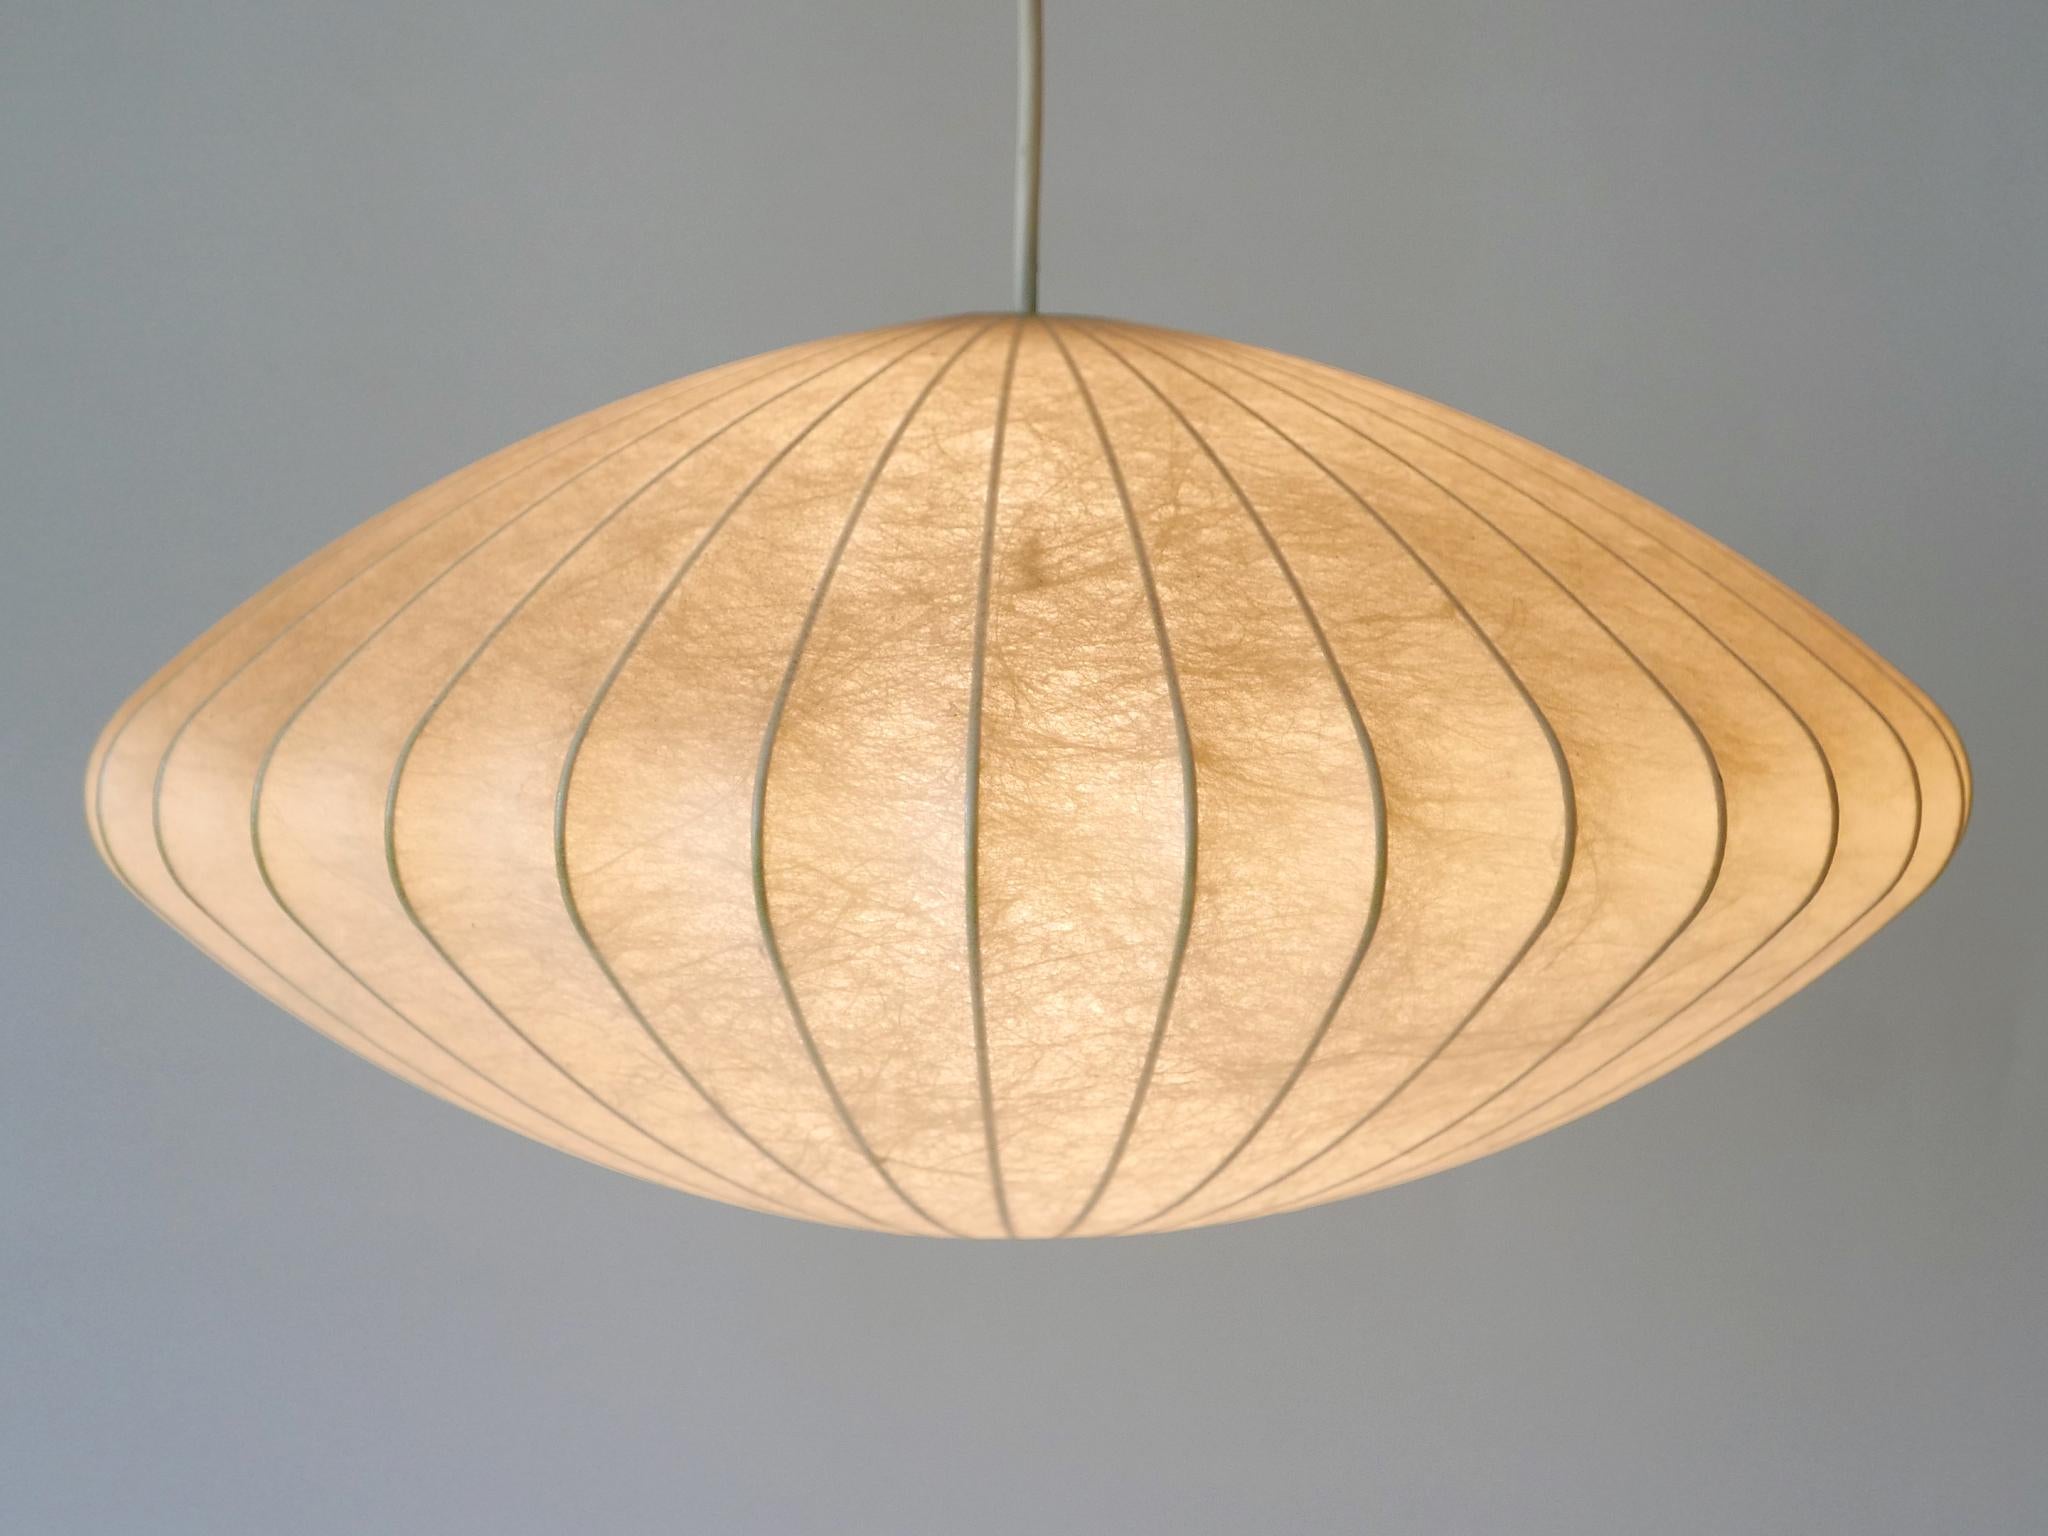 Rare Mid-Century Modern Cocoon Pendant Lamp or Hanging Light by Goldkant 1960s For Sale 3